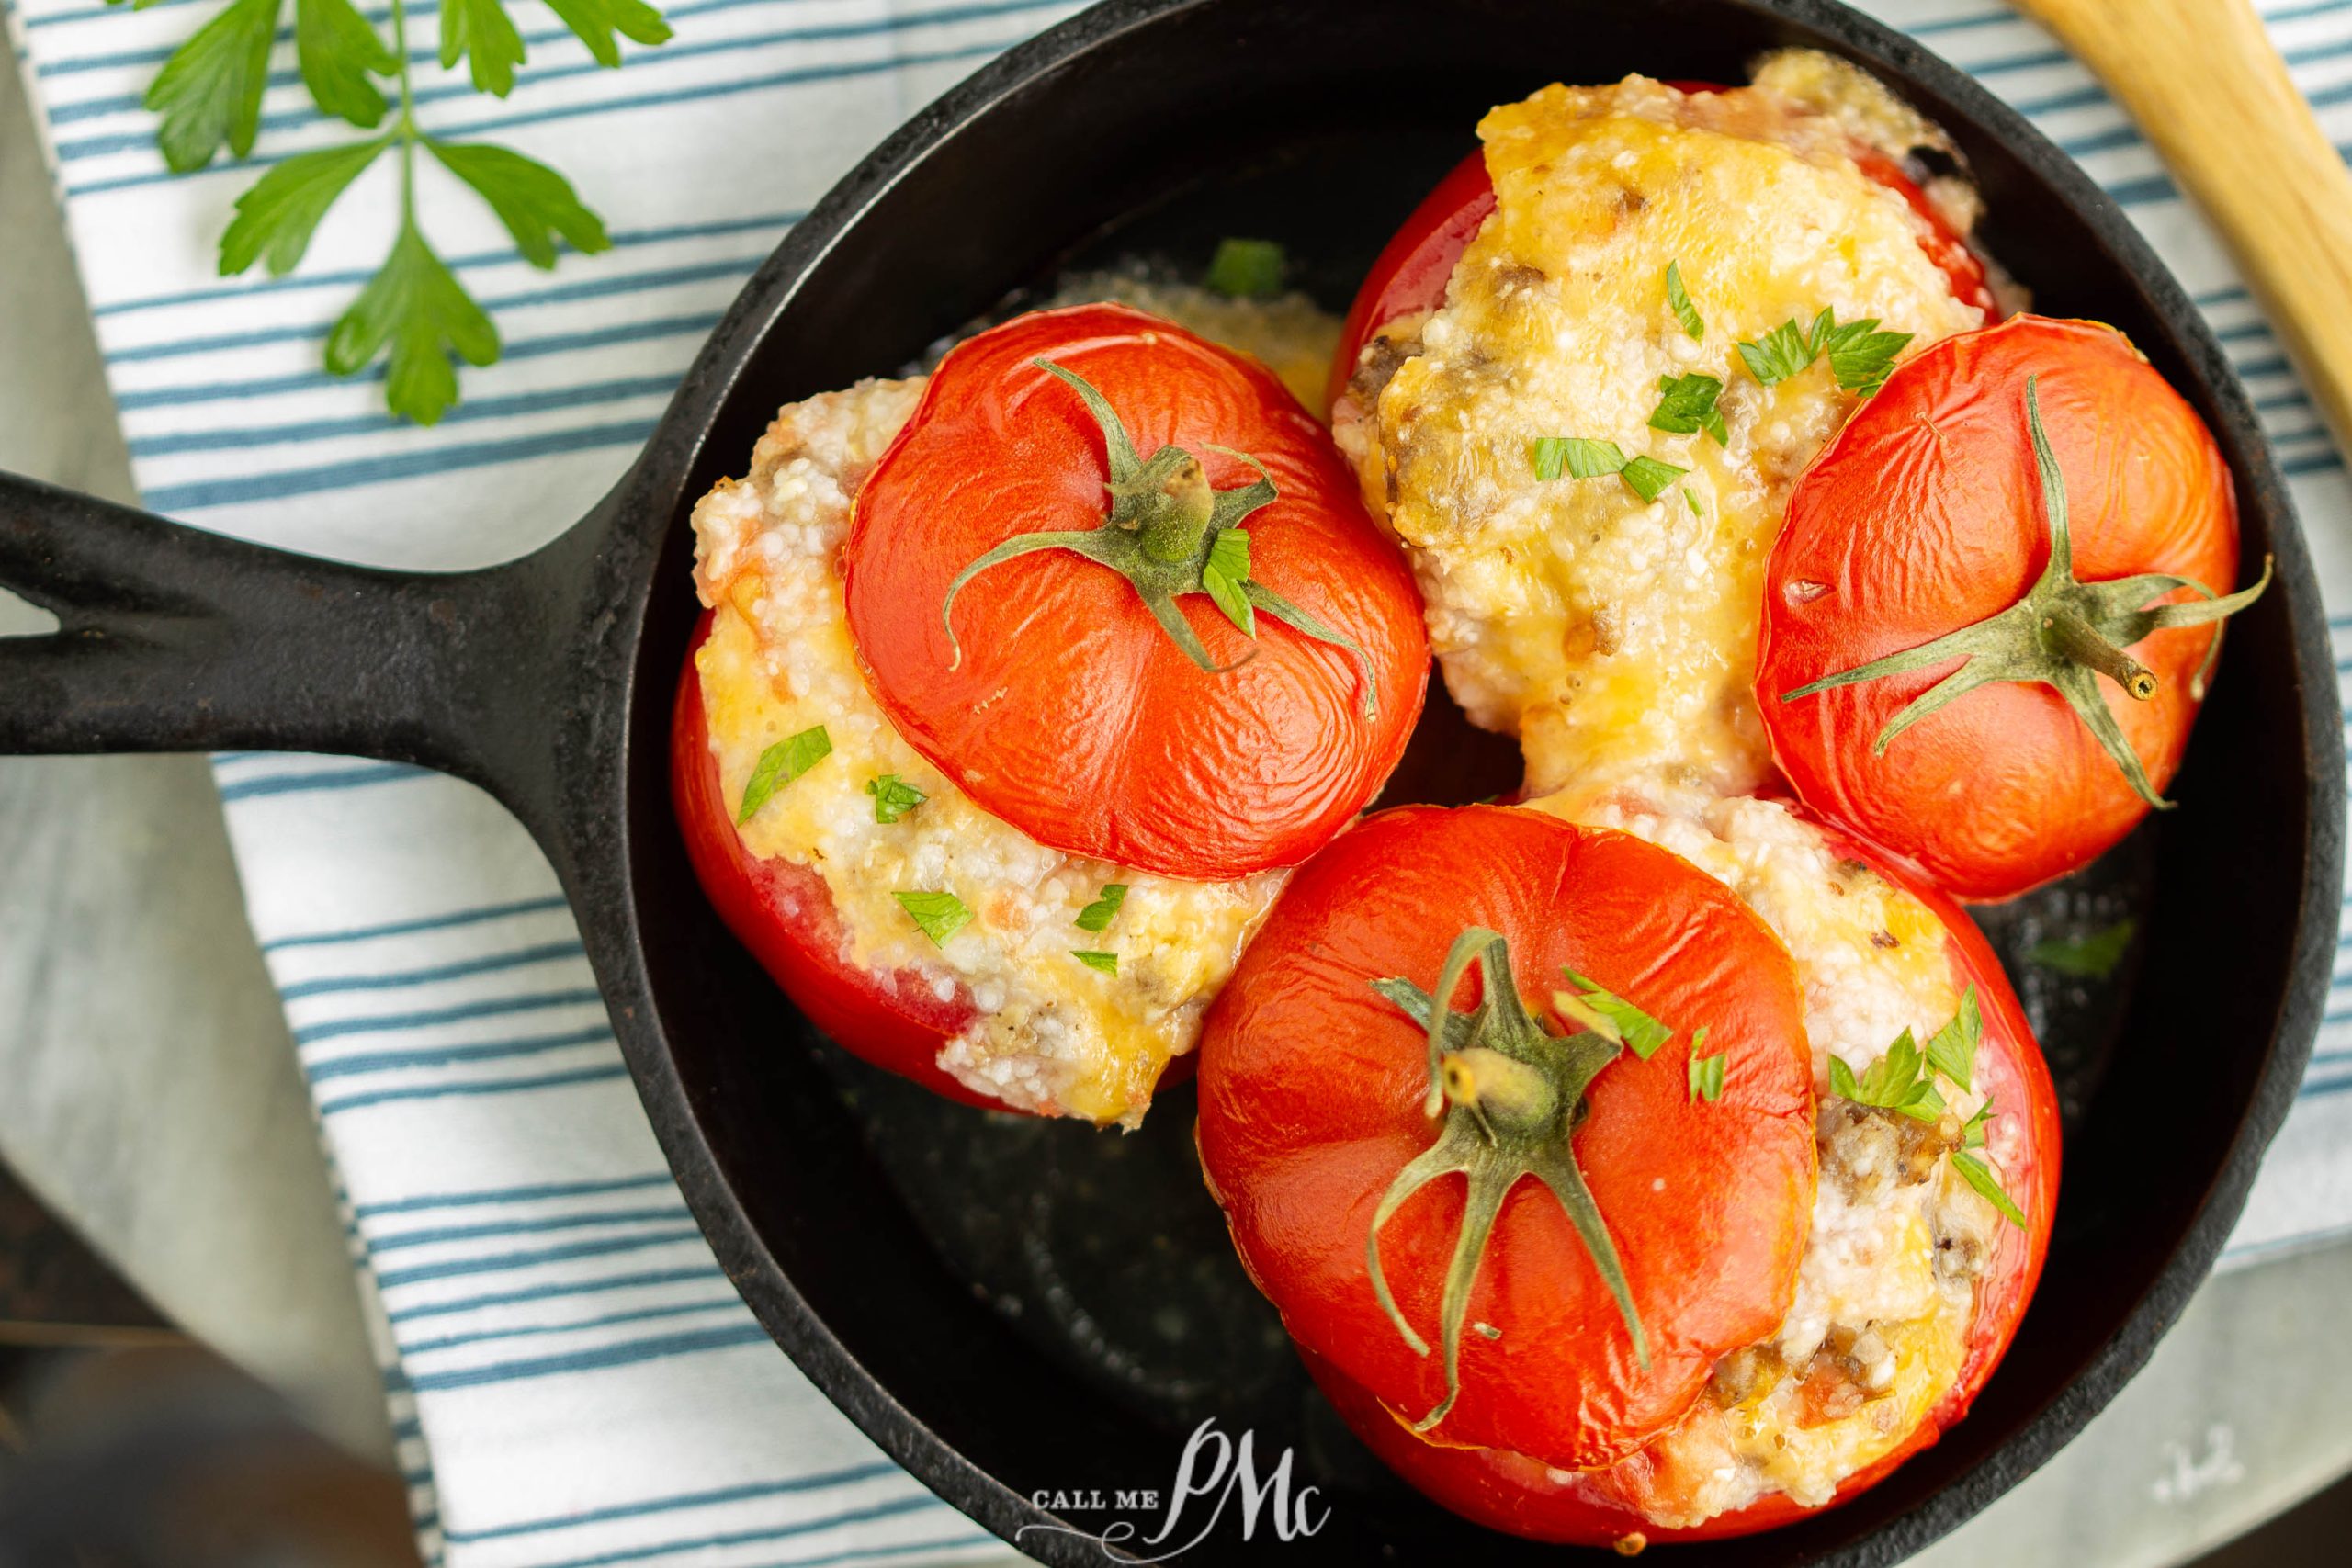 Grits Casserole Stuffed Baked Tomatoes in a cast iron skillet.